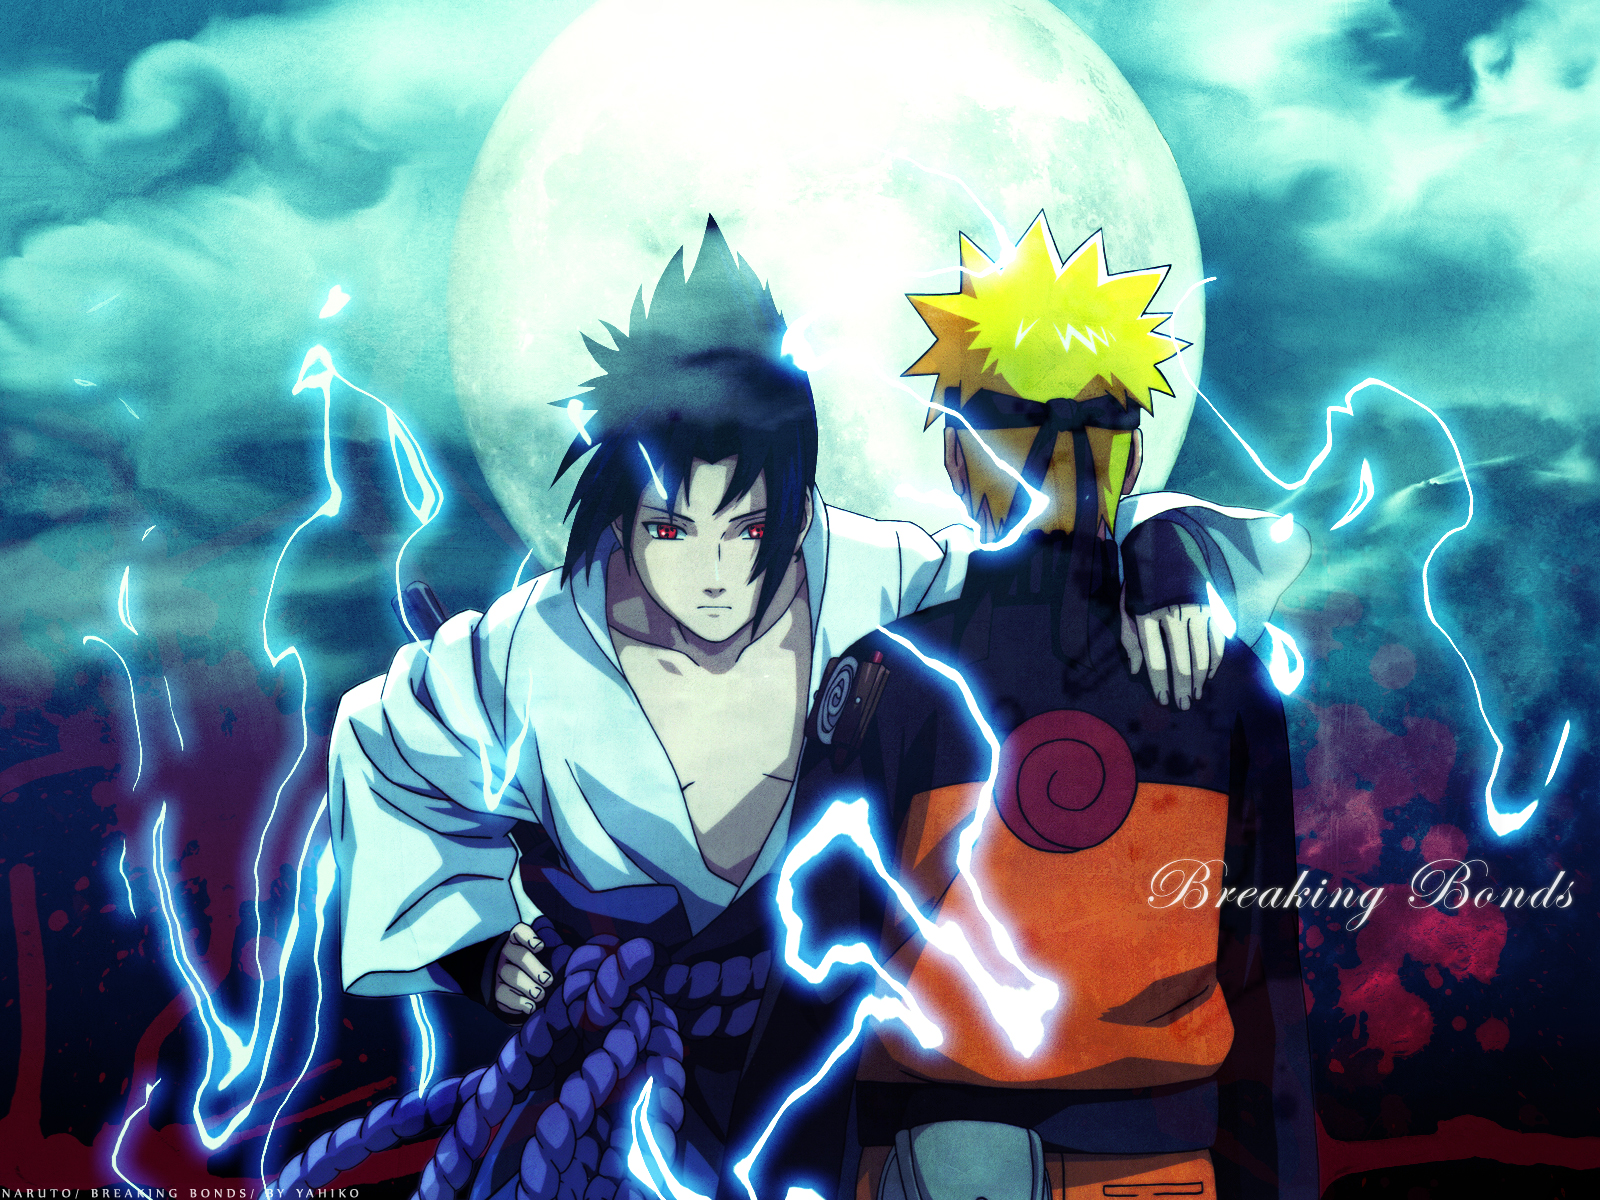 I made this cool little edit for an iPad wallpaper  rNaruto